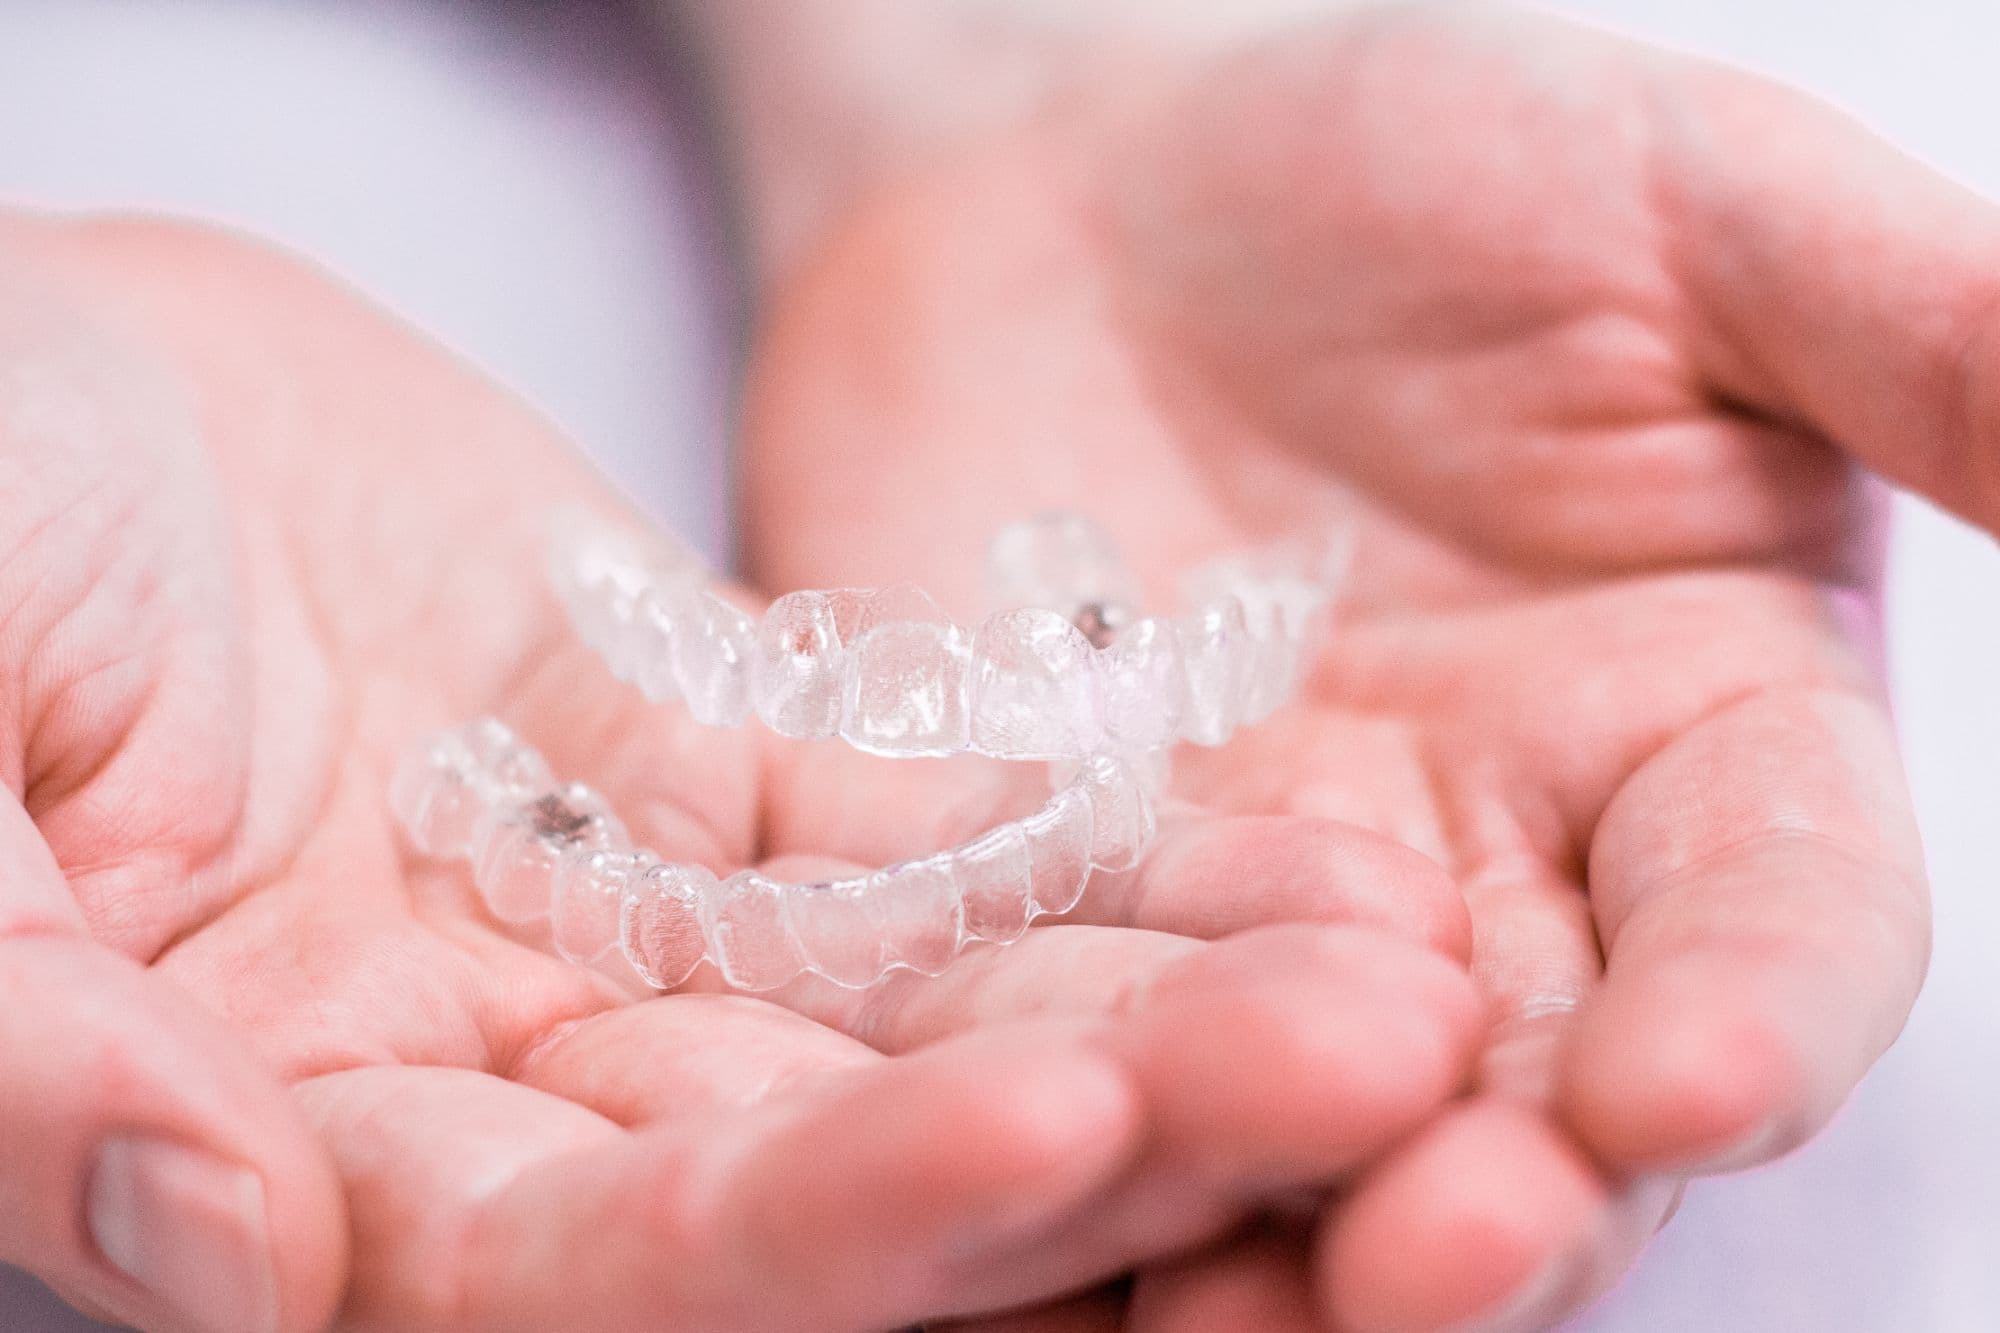 hands holding aligners